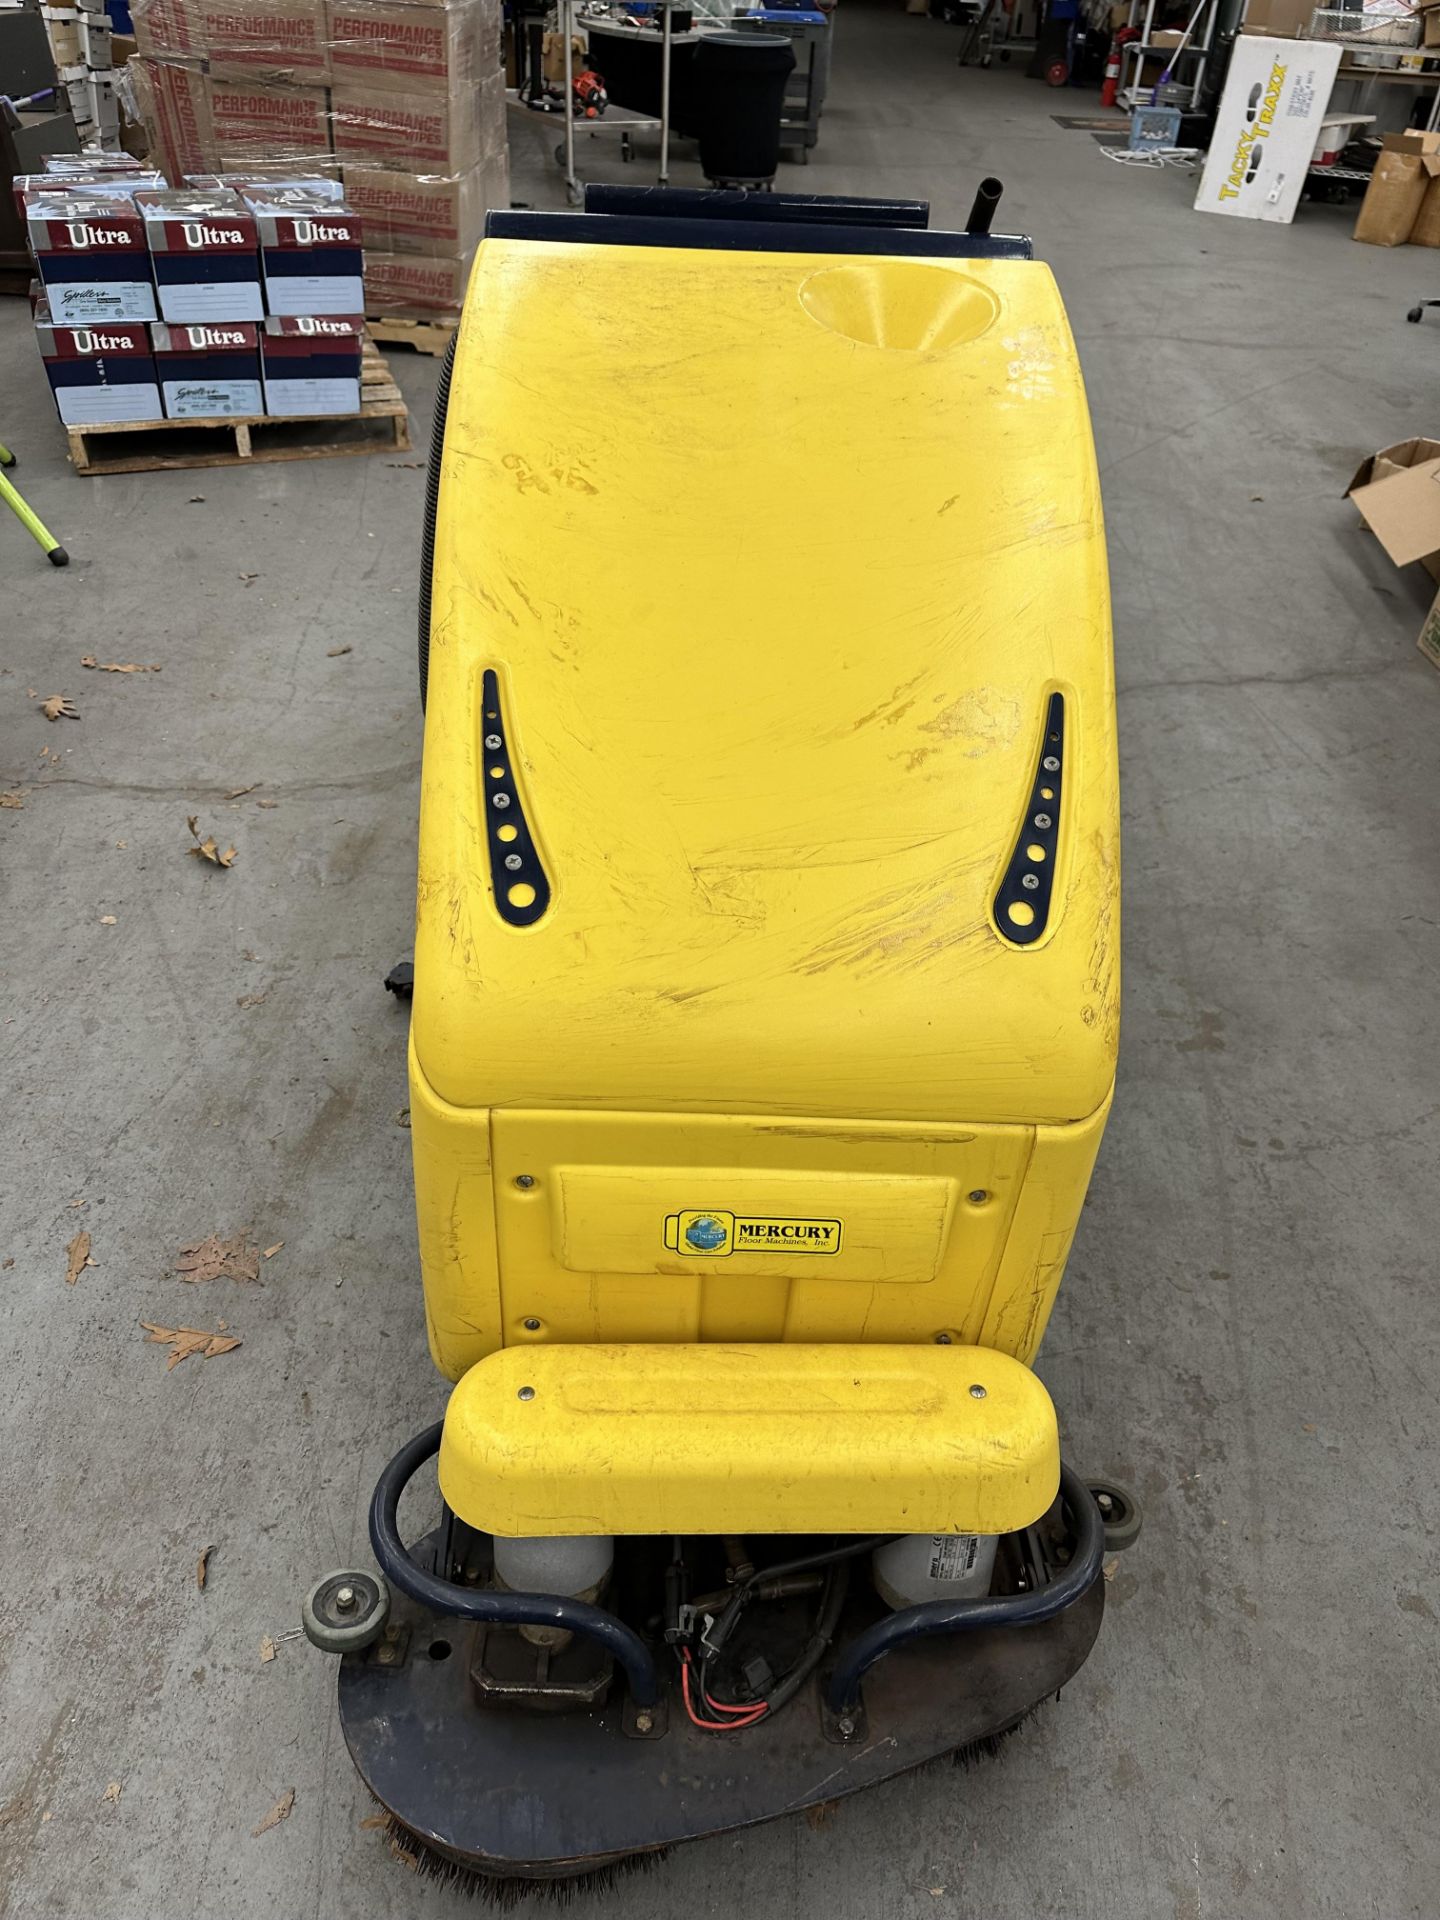 TSM Industrial Floor Cleaning Machine w/(2) 36V (3 x12) Batteries (NO FURTHER INFO) (WILL POST VIDEO